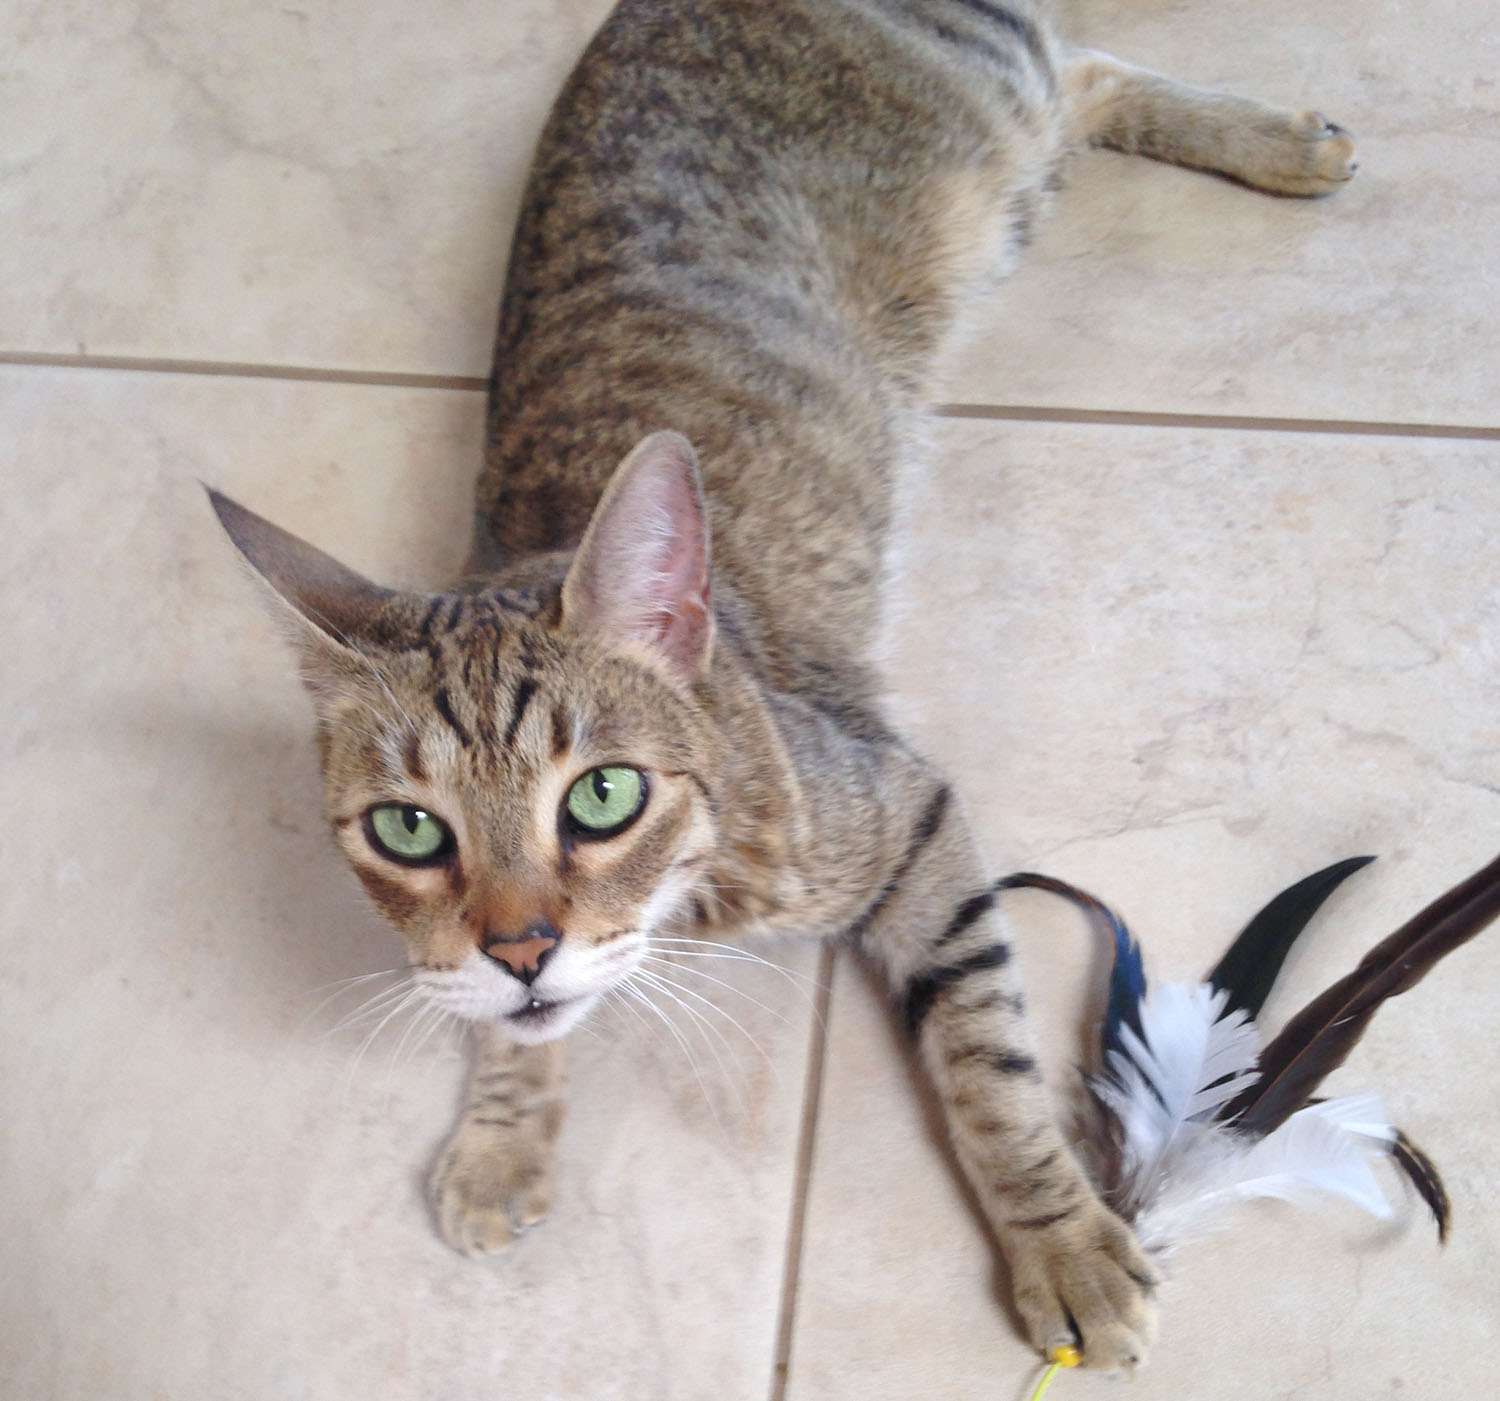 cat-playing-feather-toy.jpg